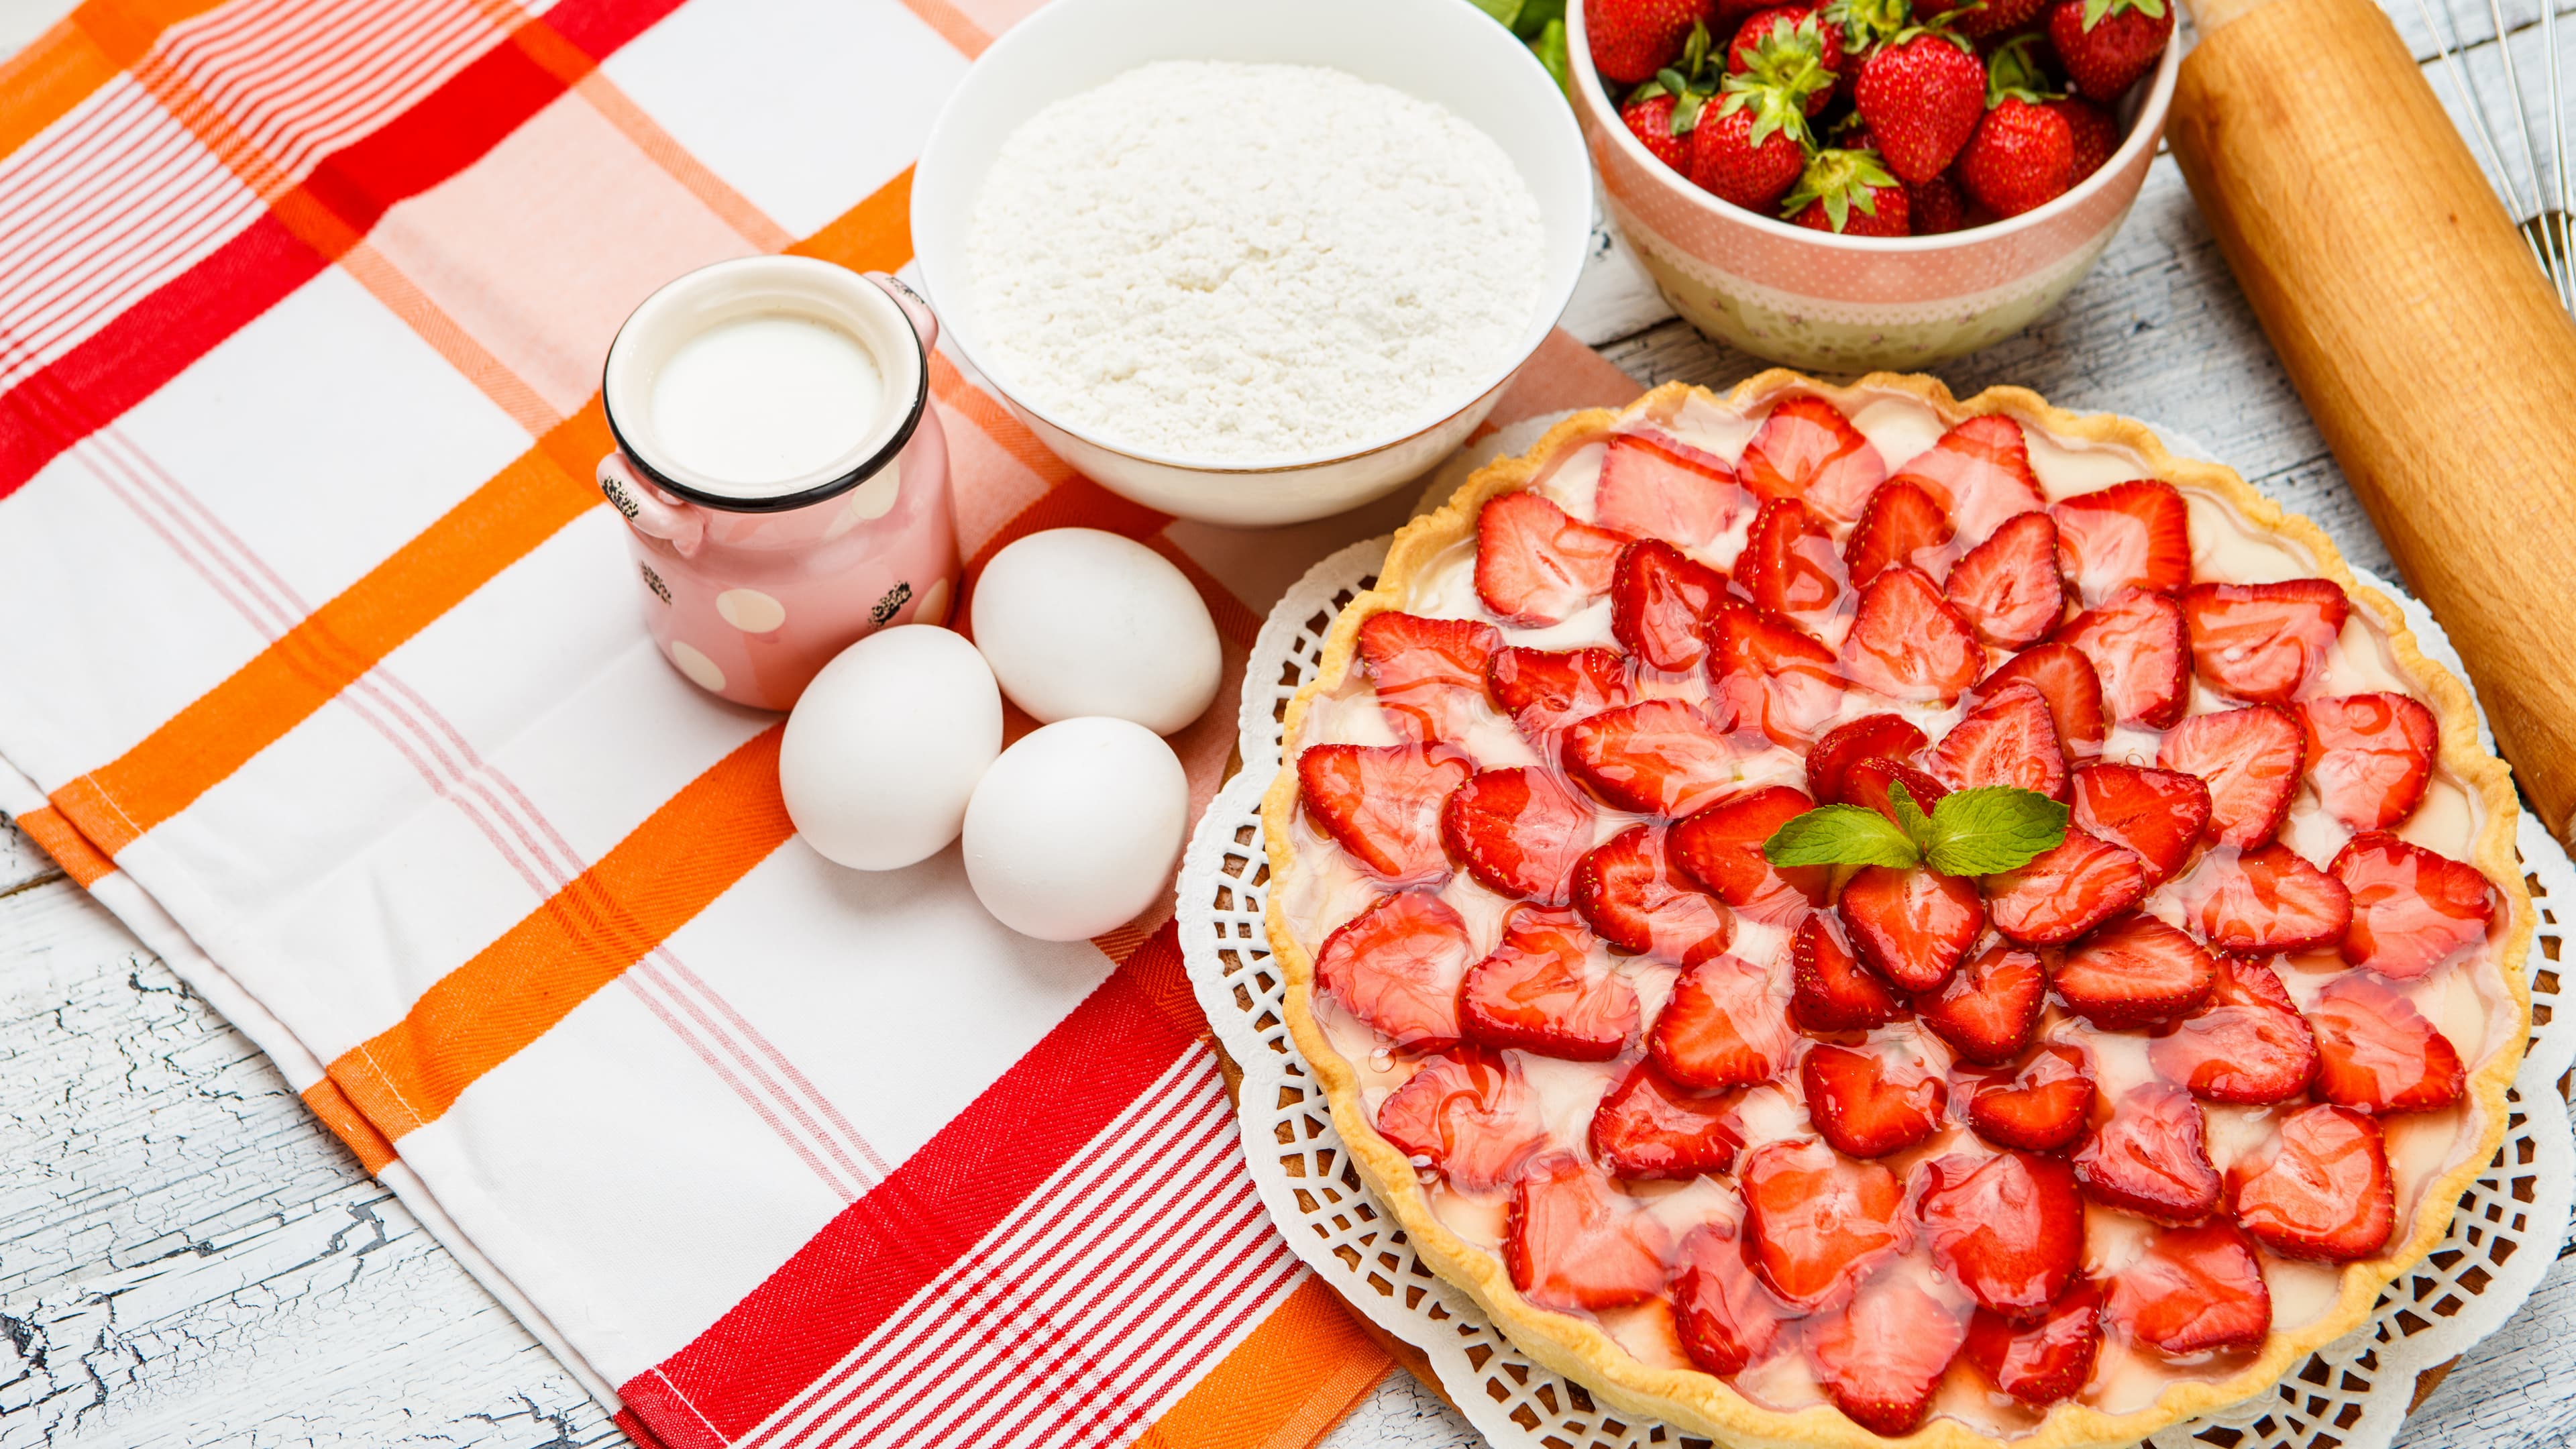 Satisfy Your Sweet Tooth With the Famous Shoney's Strawberry Pie Recipe